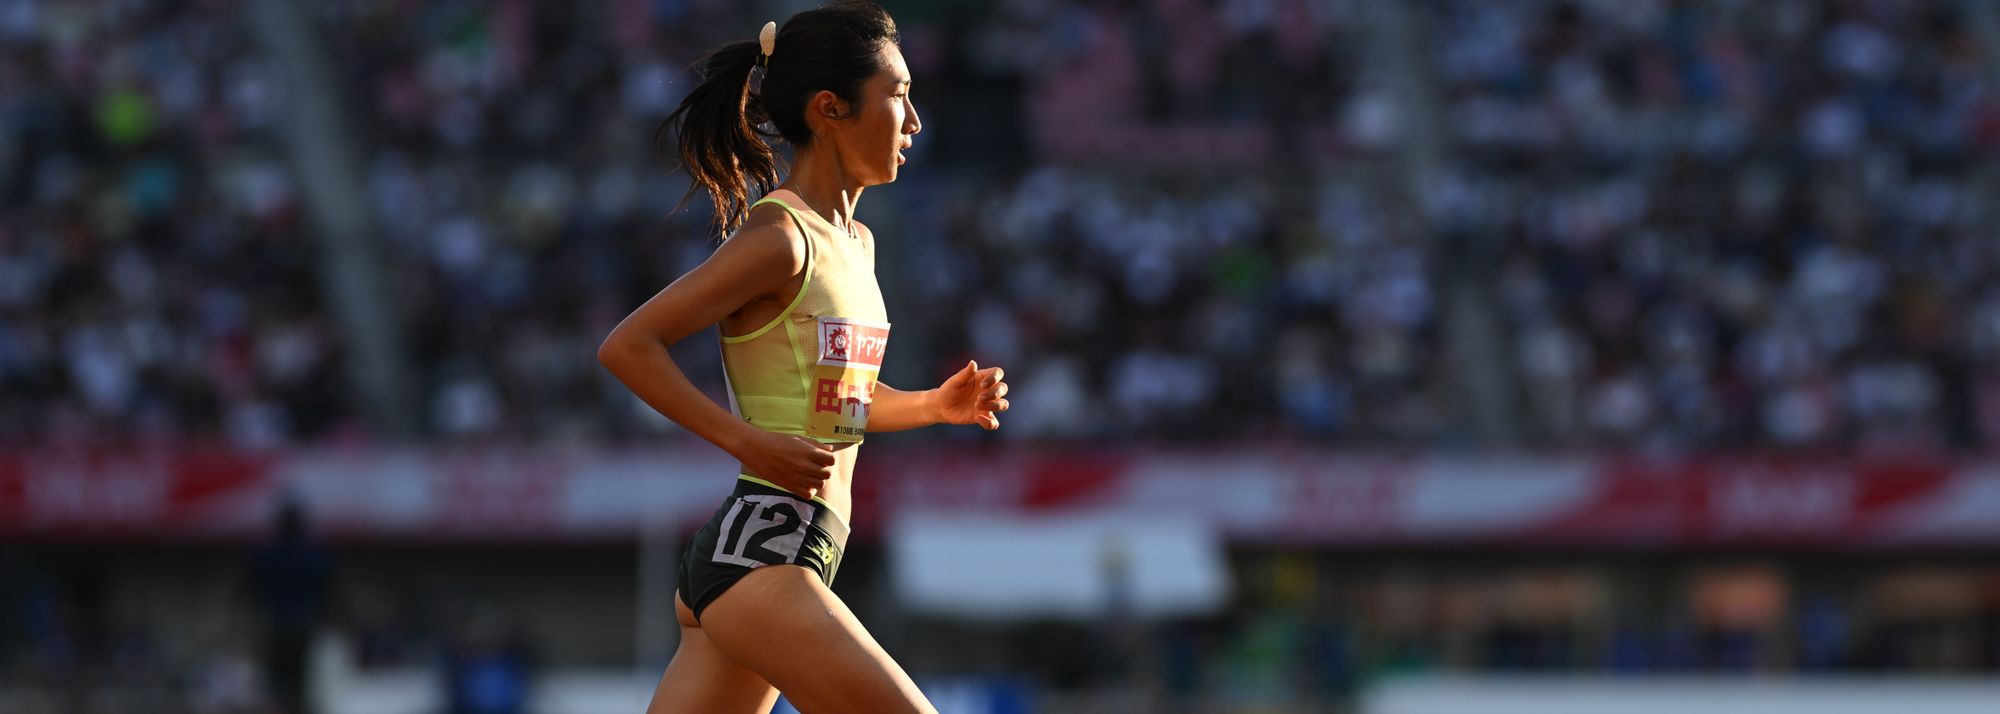 Nozomi Tanaka competed in the women's 1500m track and field event at the Olympic Games Tokyo 2020 in 2021 and finished in 8th place against world-class competitors. Since then, she has been steadily improving her strength, and her performance has attracted the attention of many people.